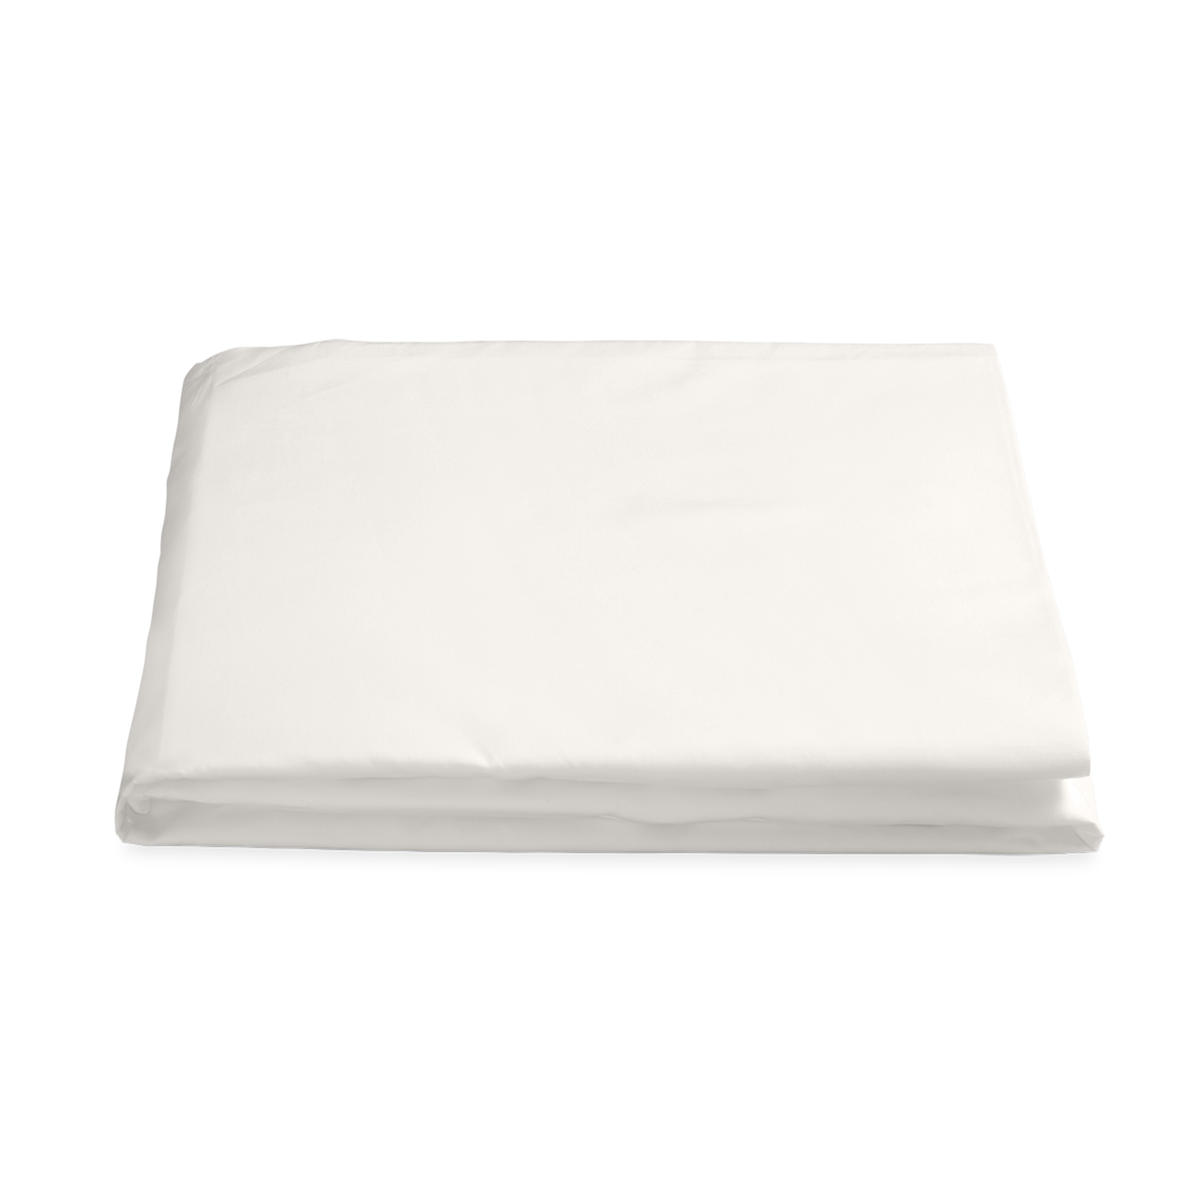 Folded Fitted Sheet of Matouk Milano Hemstitch Bedding in Color Bone